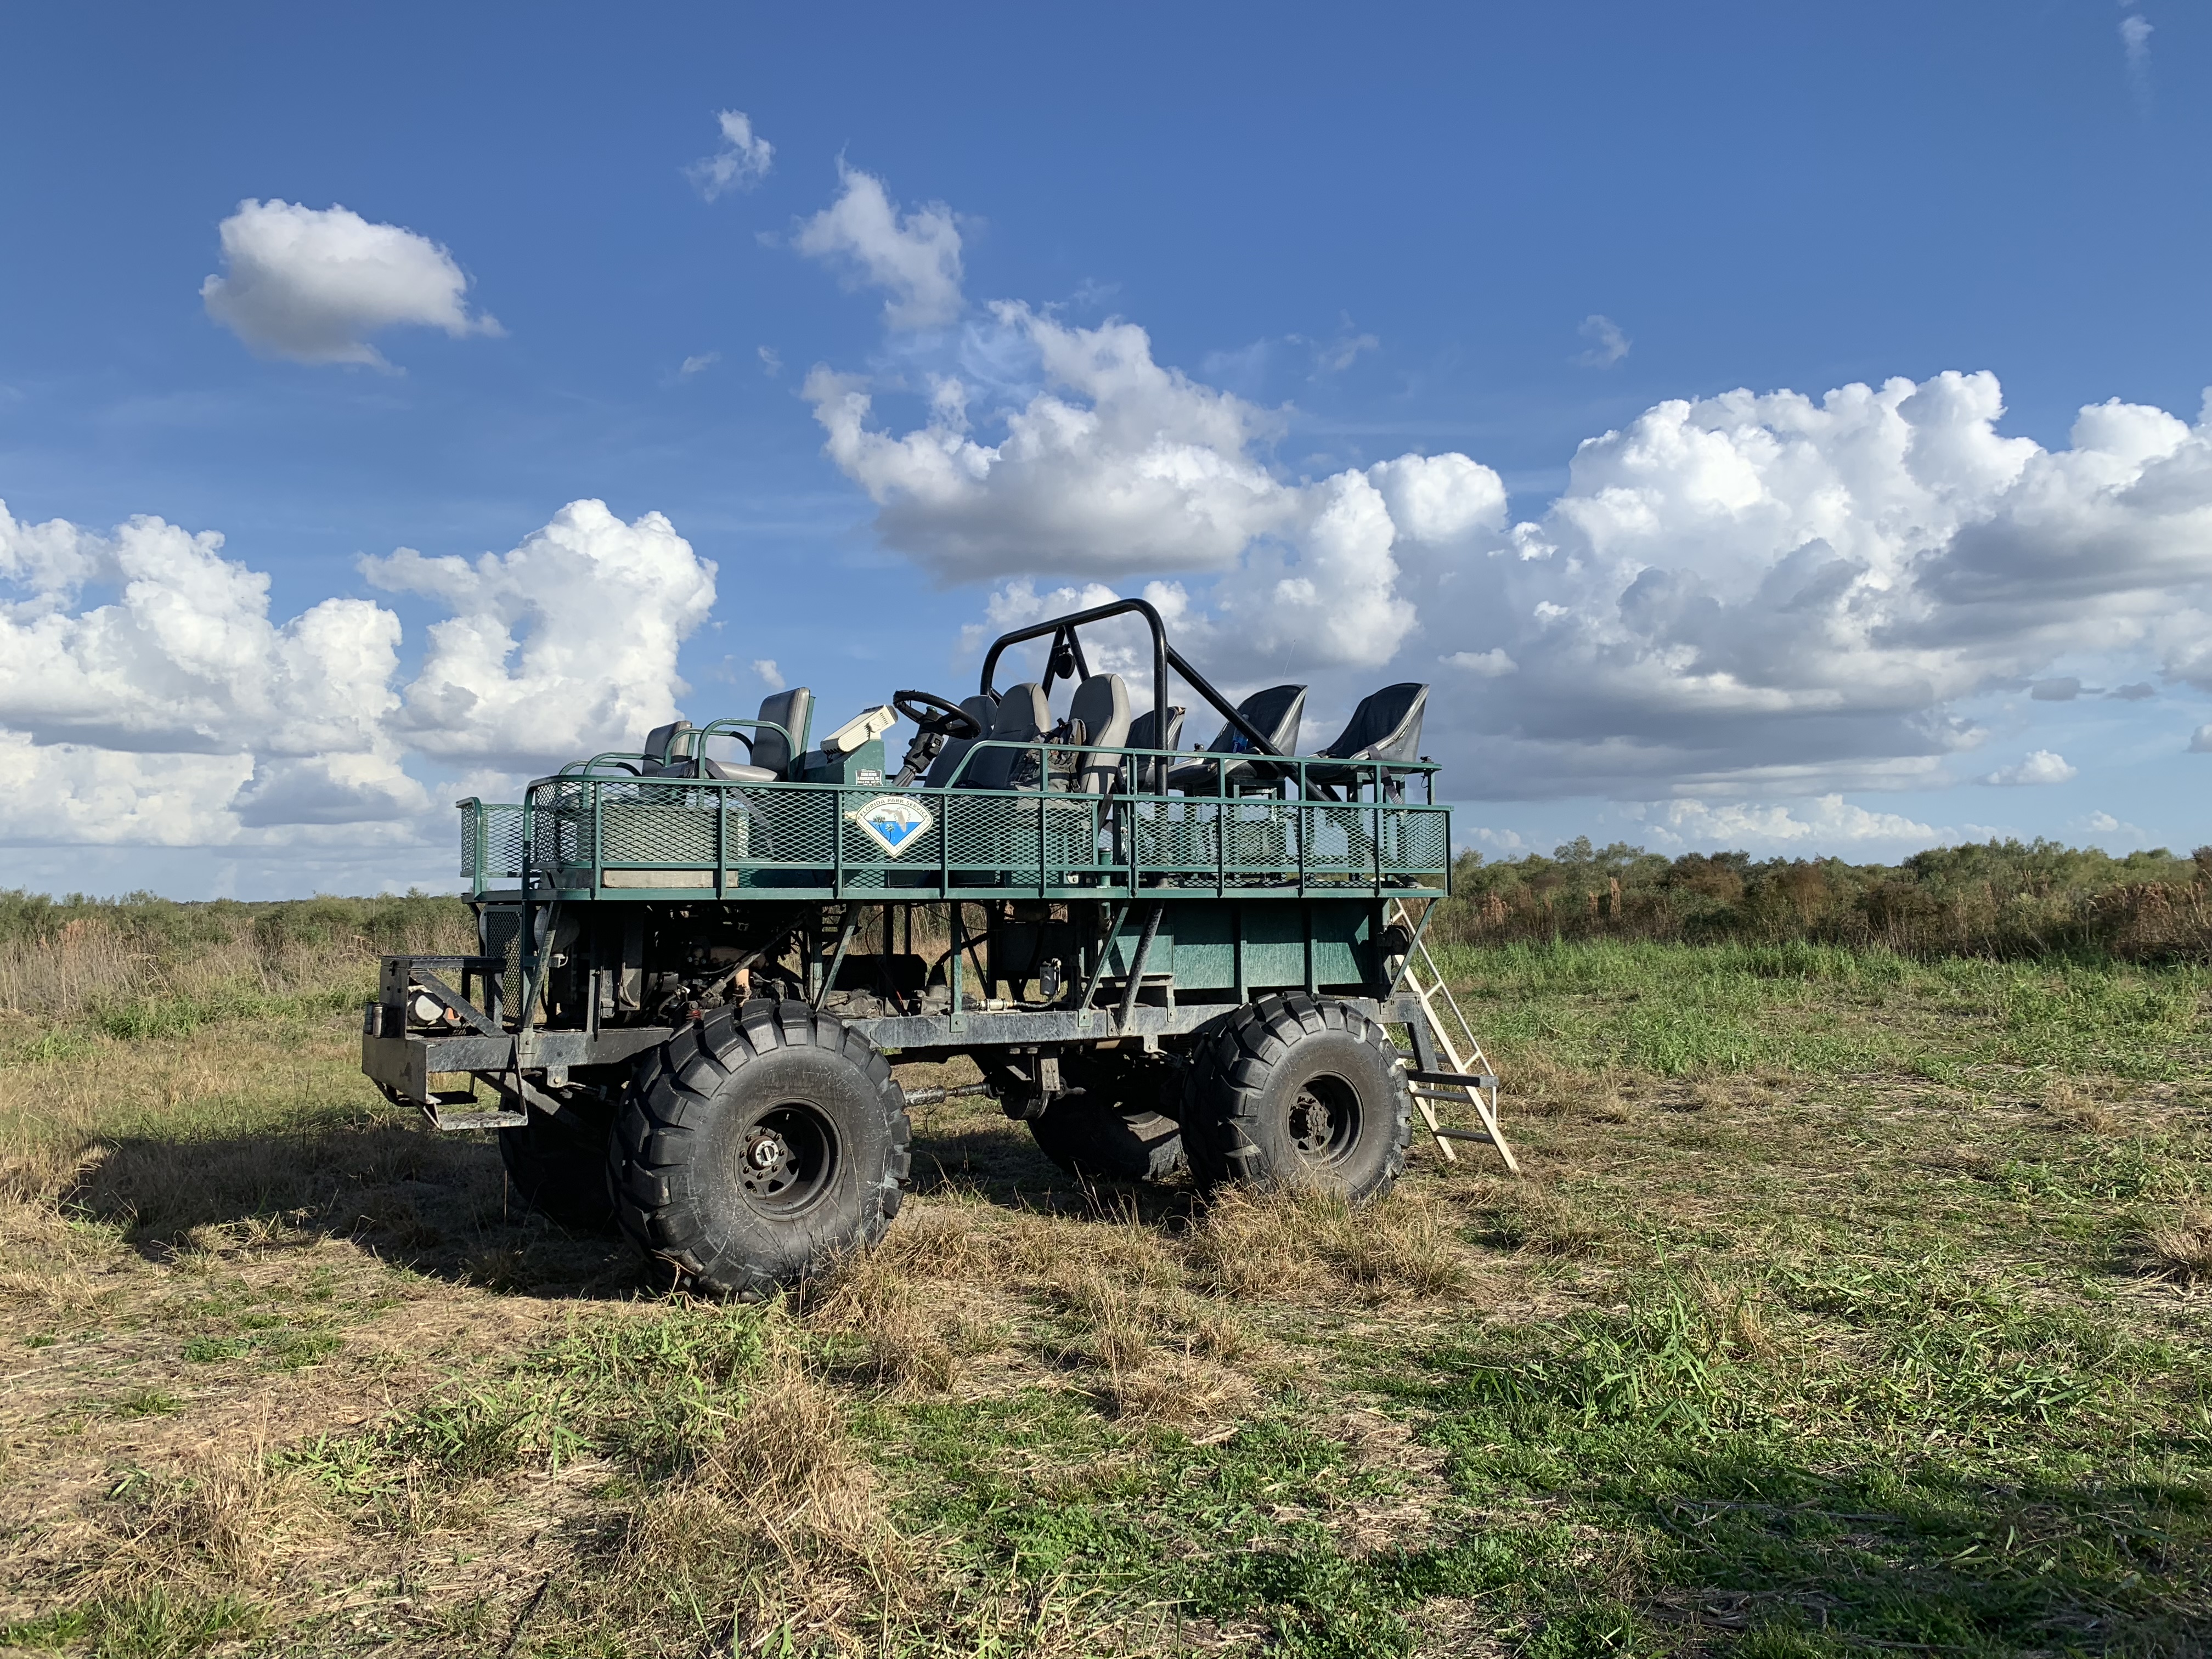 swamp buggy tours kissimmee